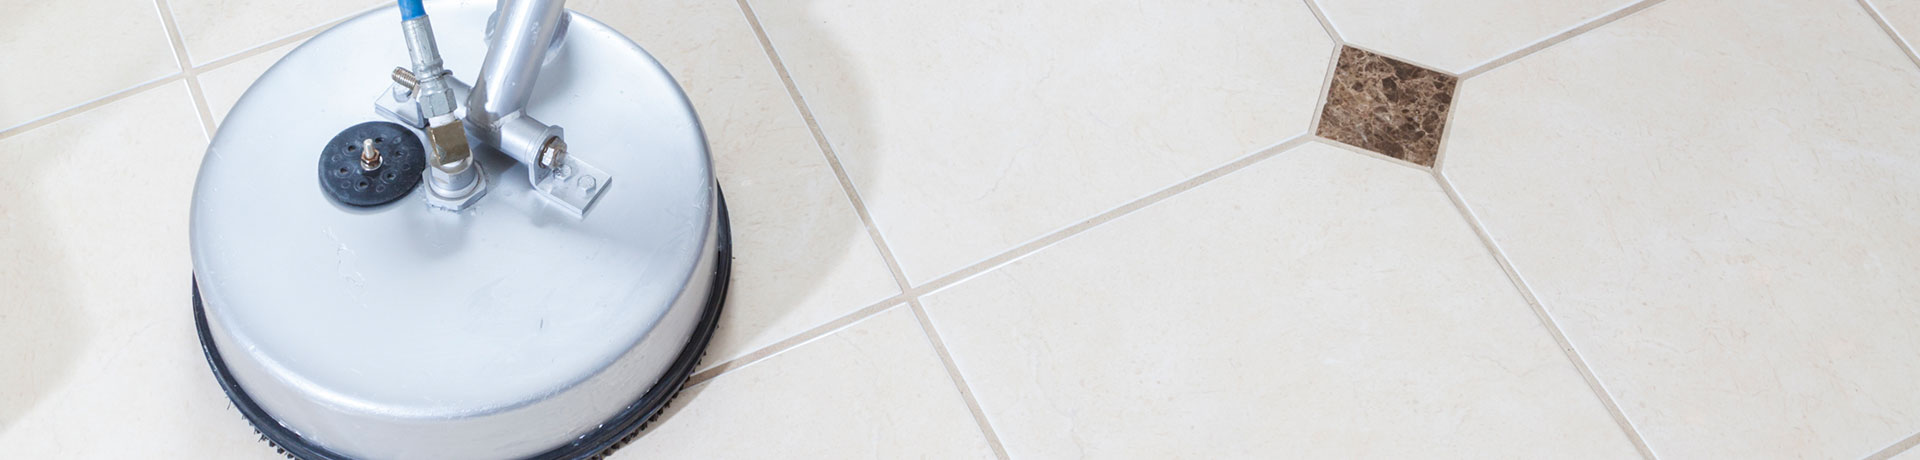 A tile and grout commercial cleaning device scrubbing floors clean